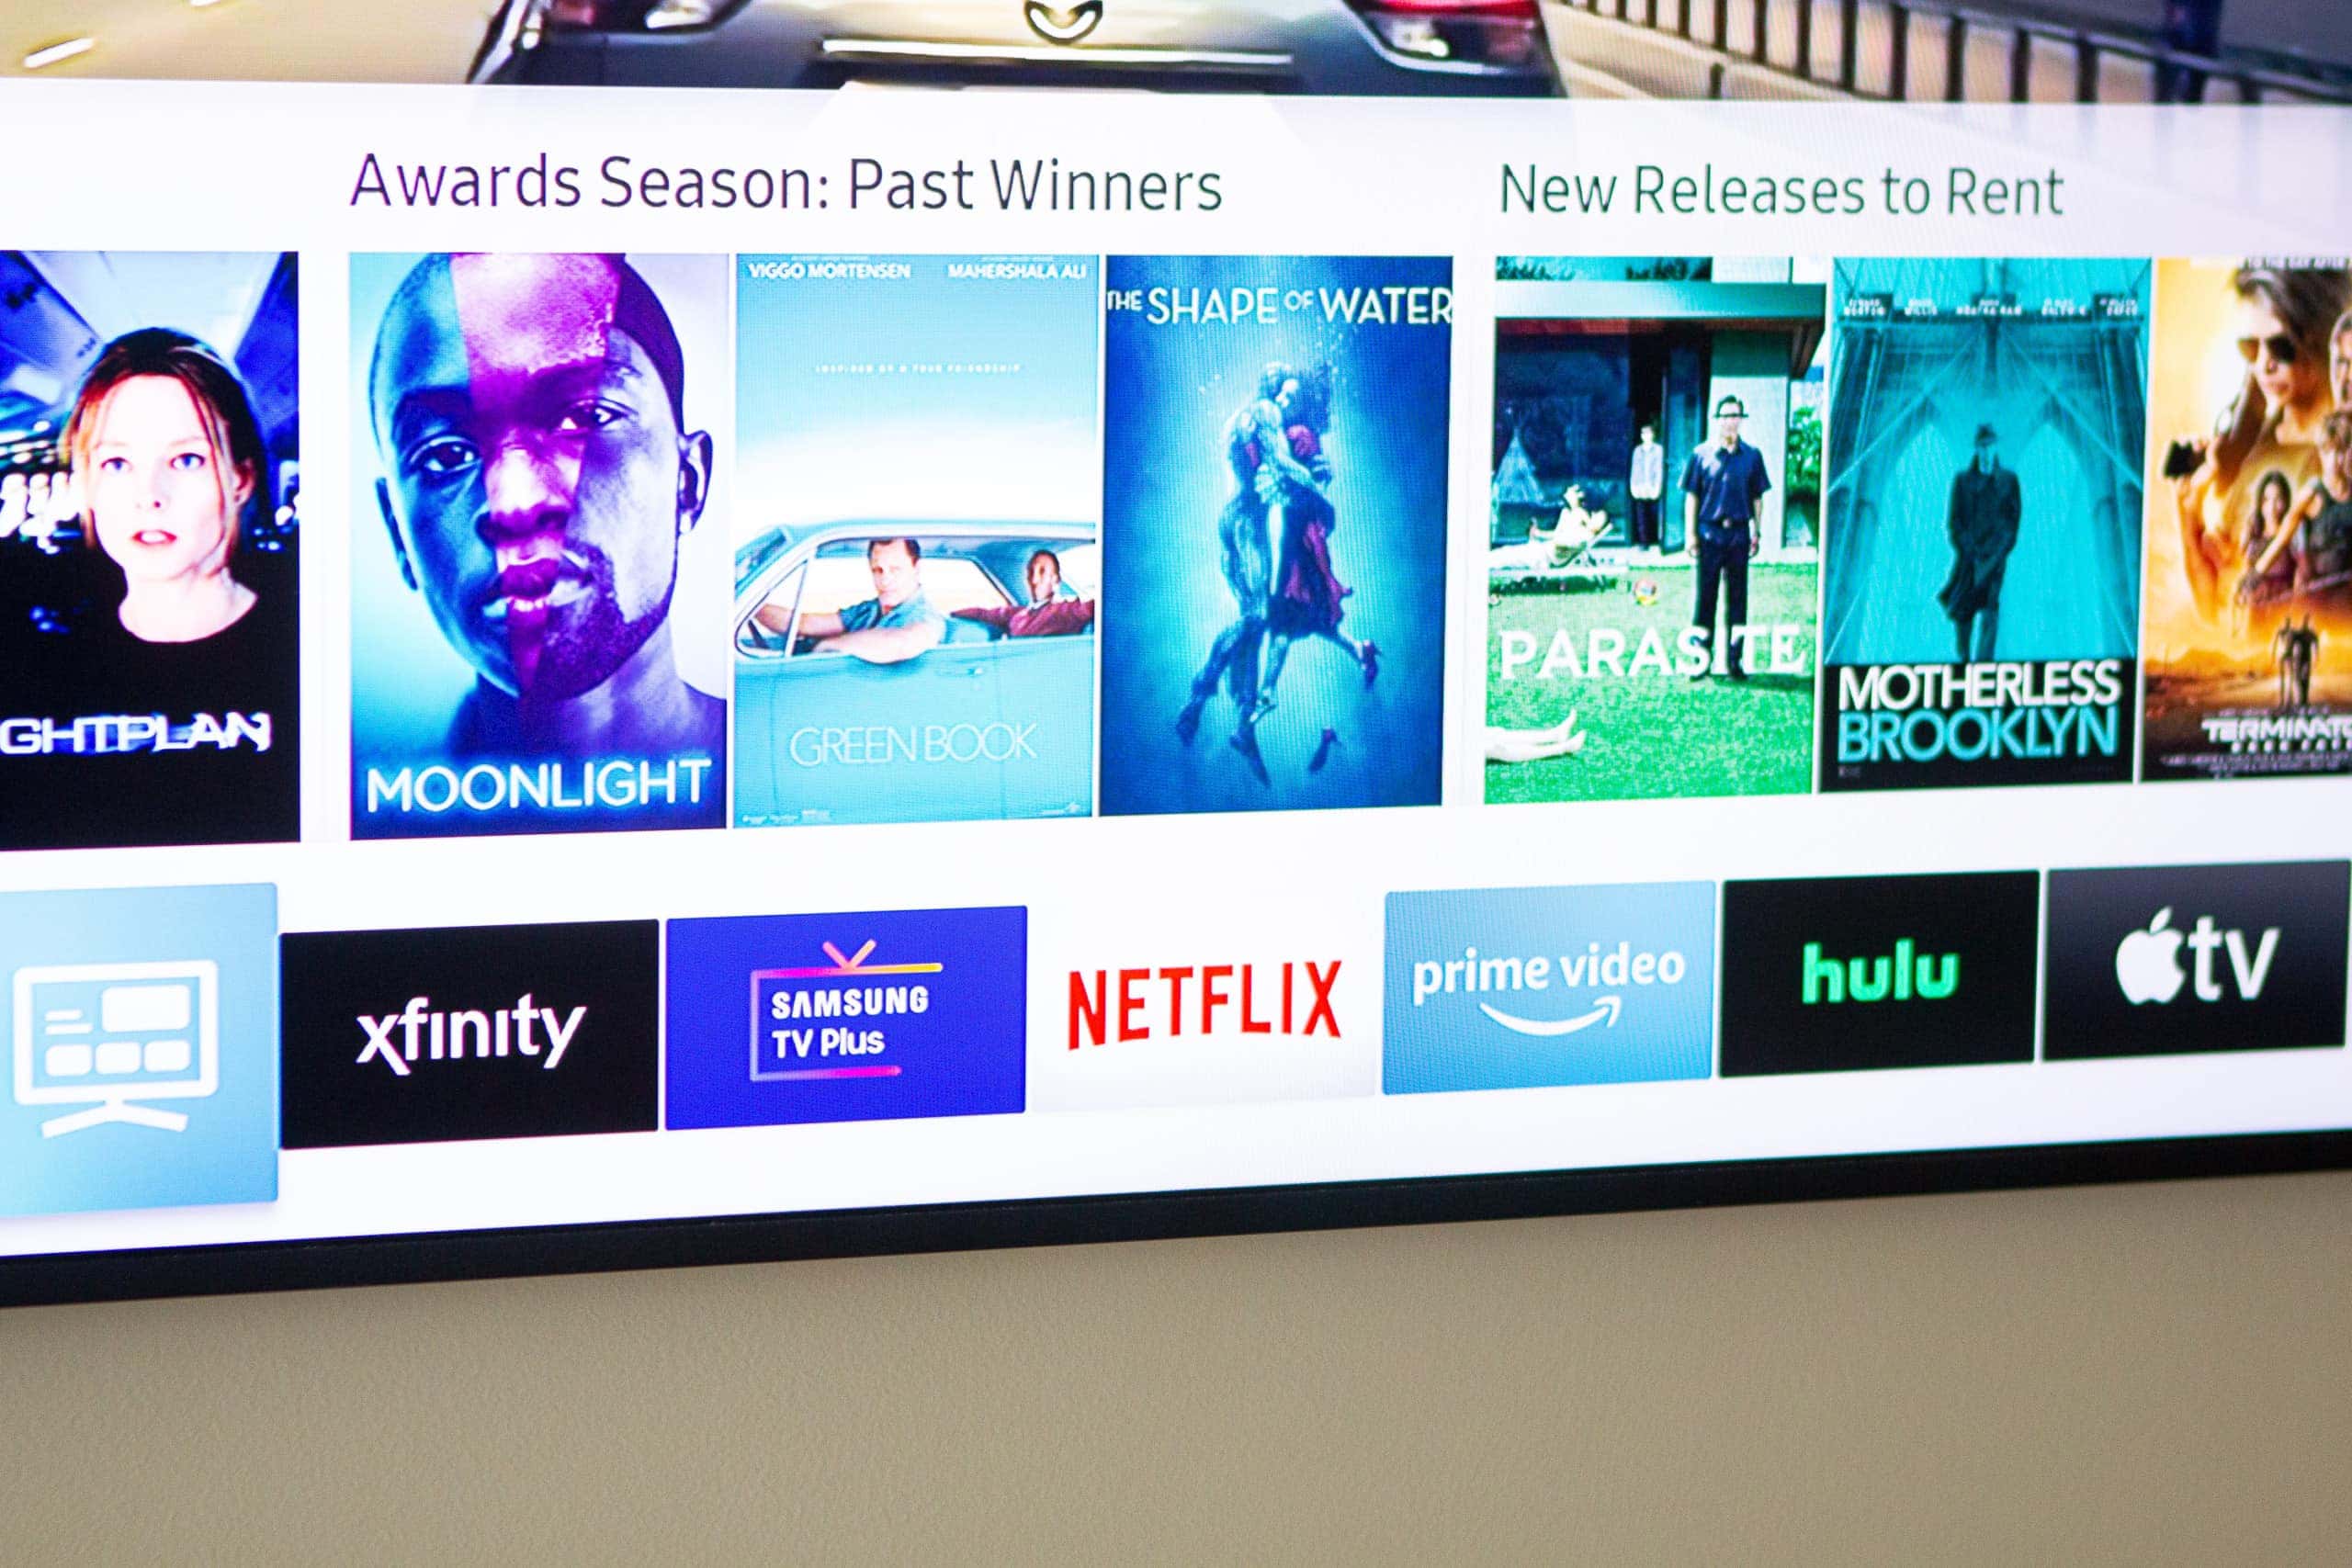 Watching netflix and streaming services on the frame TV